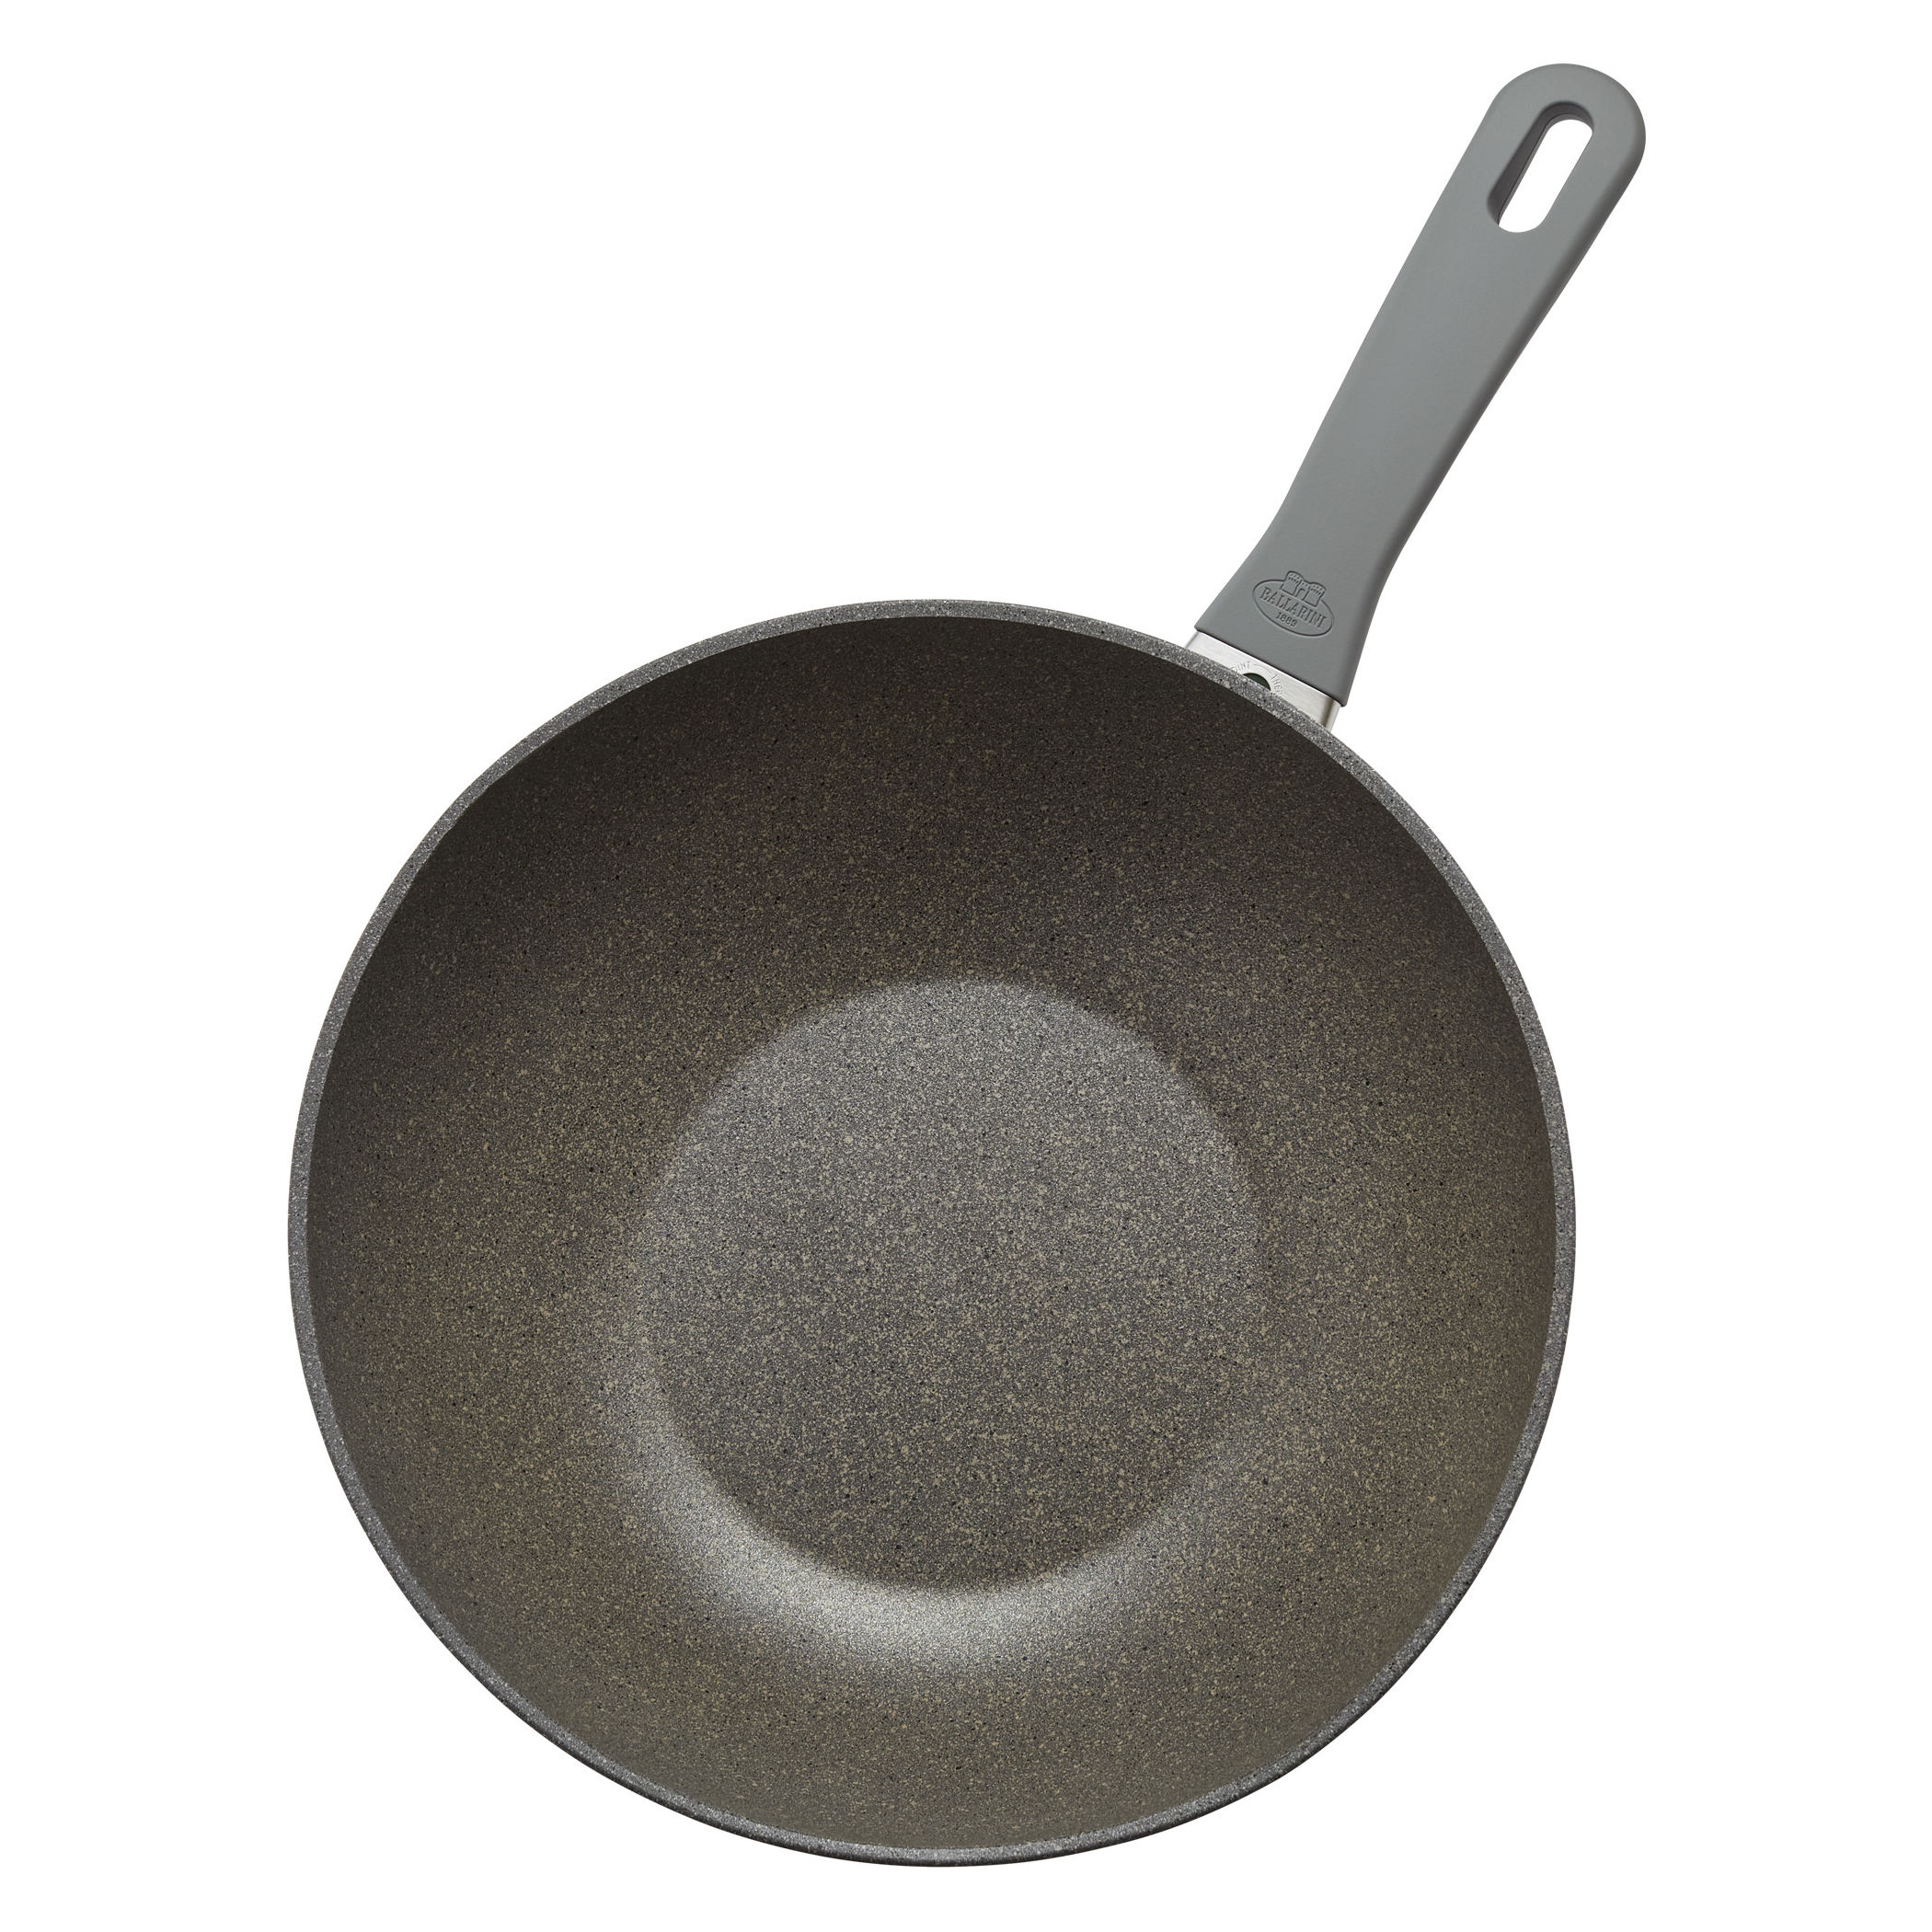  BALLARINI Professionale Series 3000 11-inch Carbon Steel Fry Pan:  Home & Kitchen